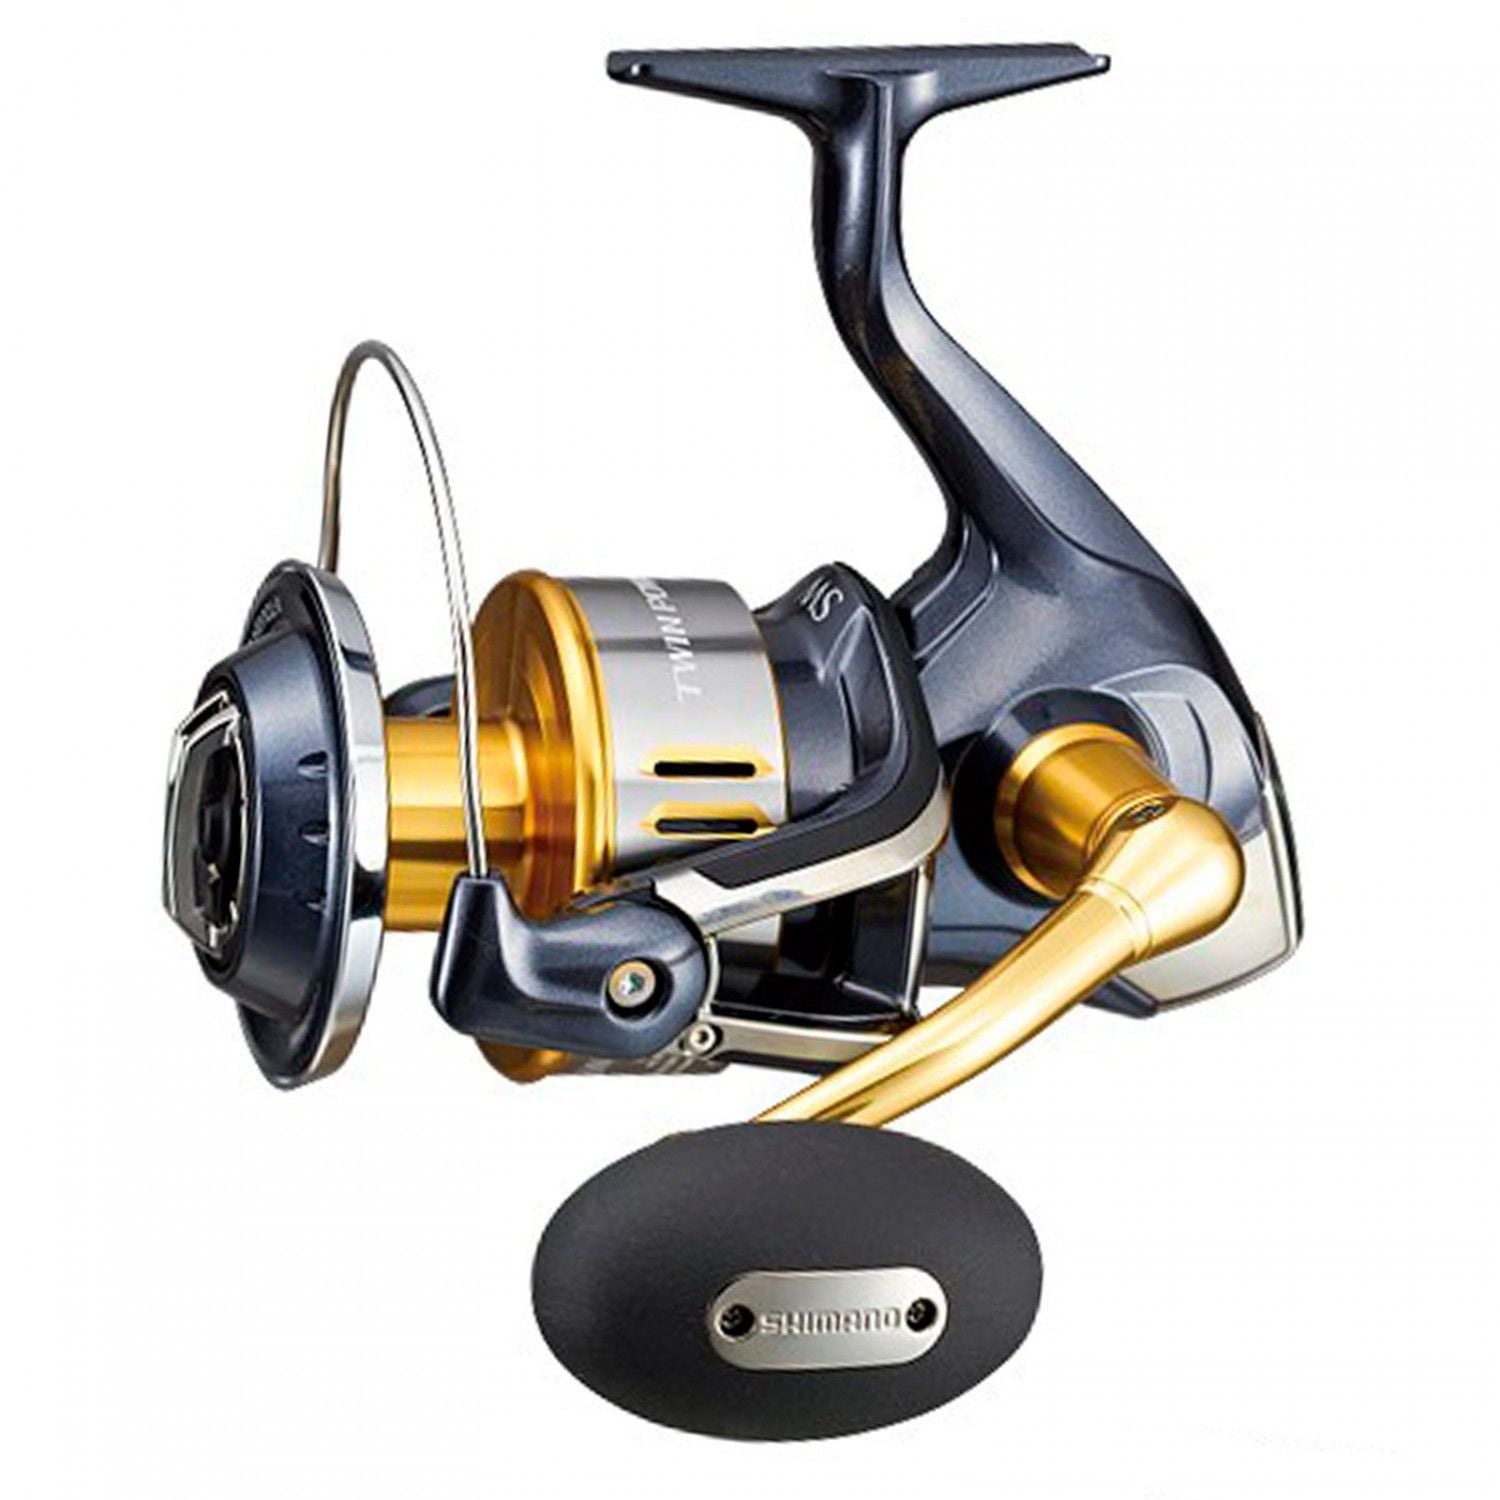 Shimano twin power 4000 sw $390 - The Hull Truth - Boating ...